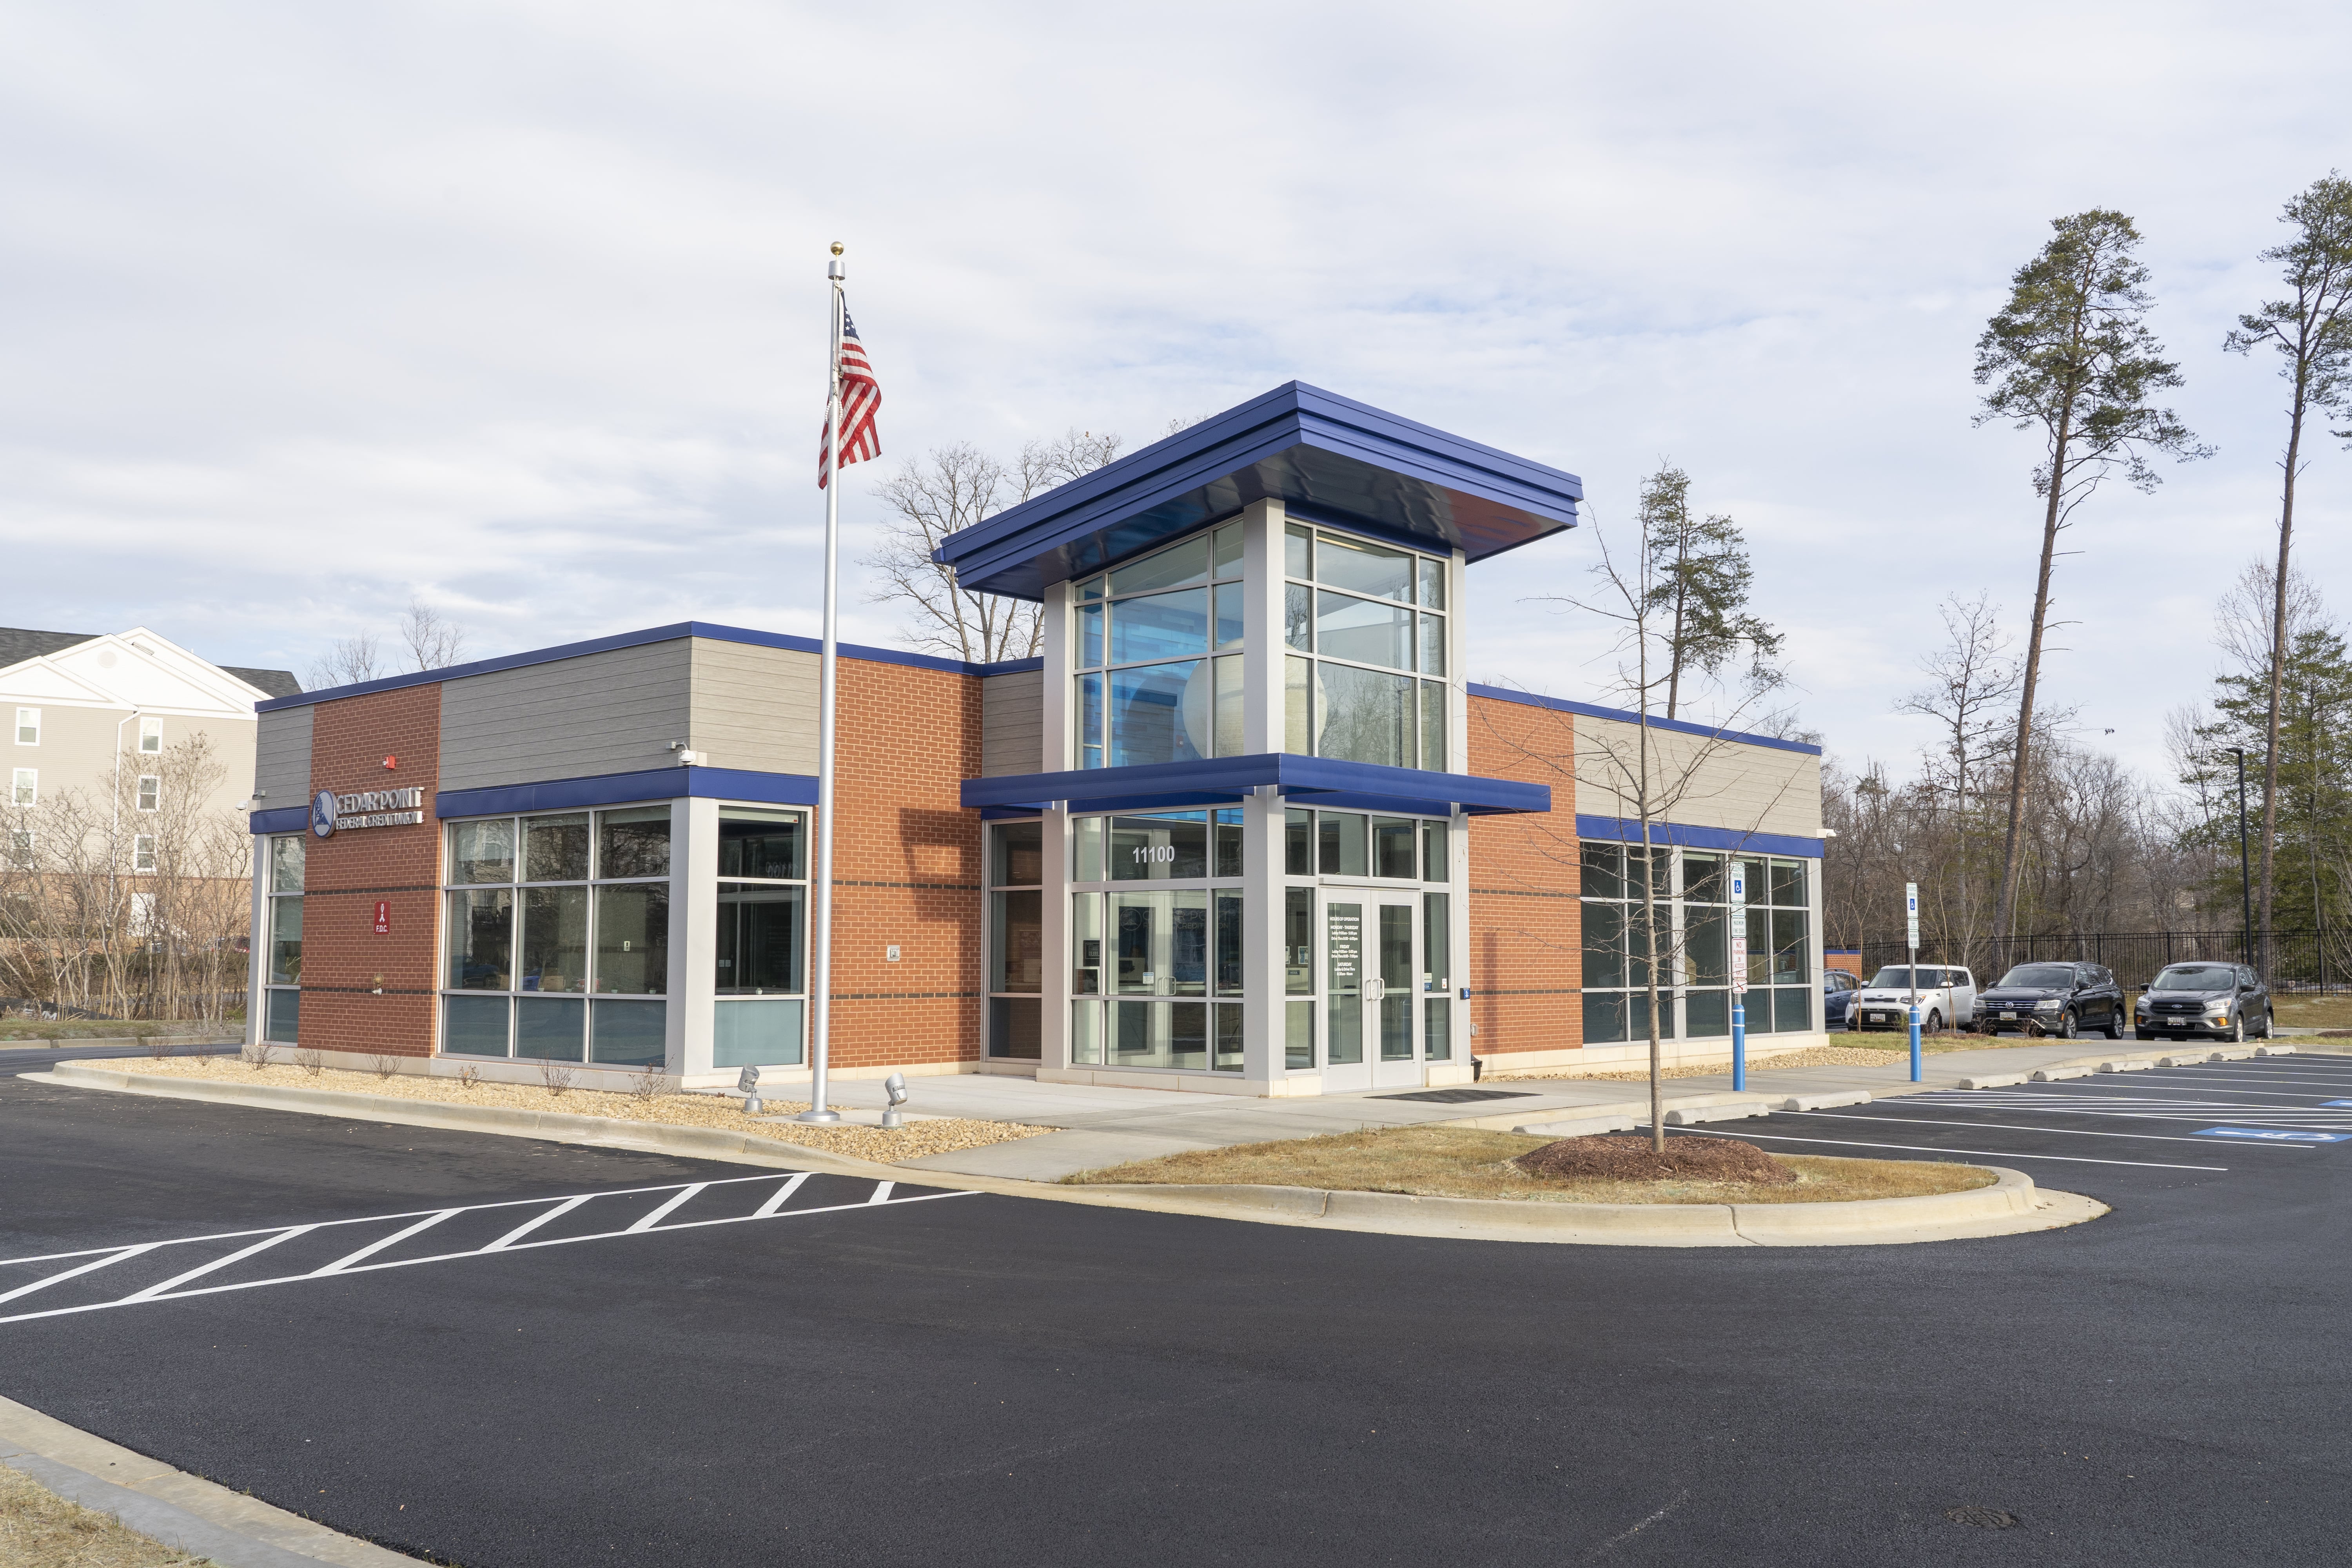 New credit union branch in Maryland